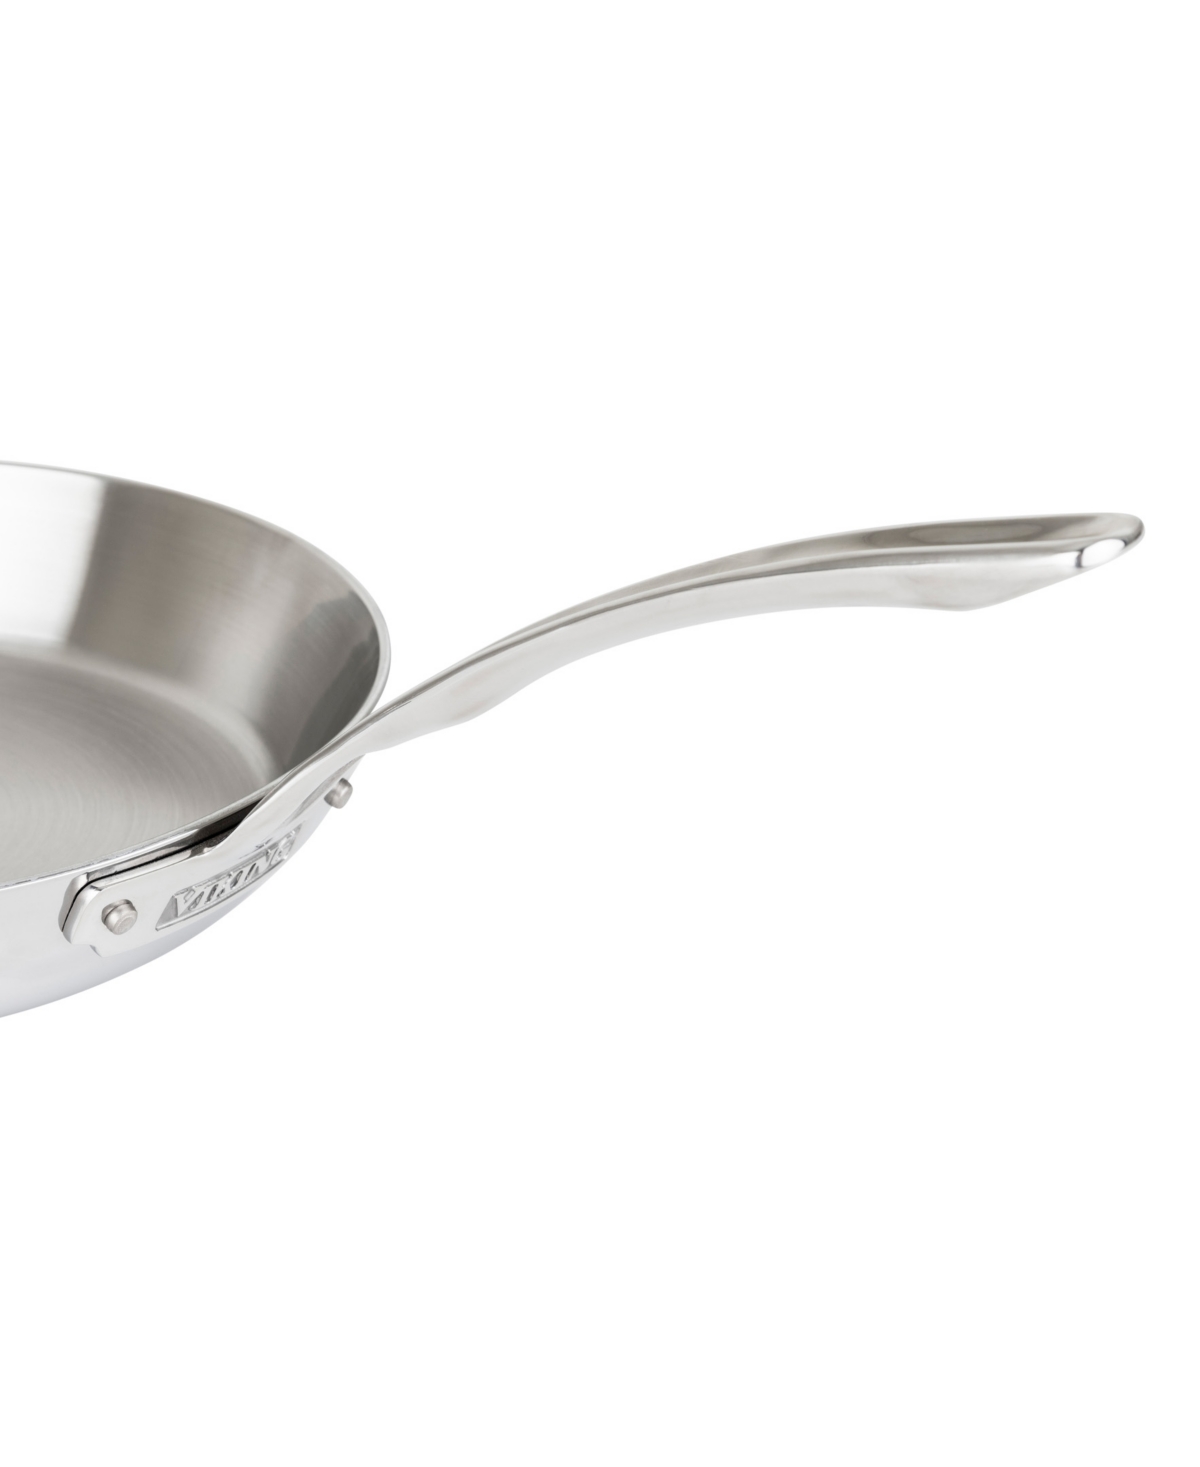 Shop Viking Contemporary 3-ply Stainless Steel 12" Fry Pan